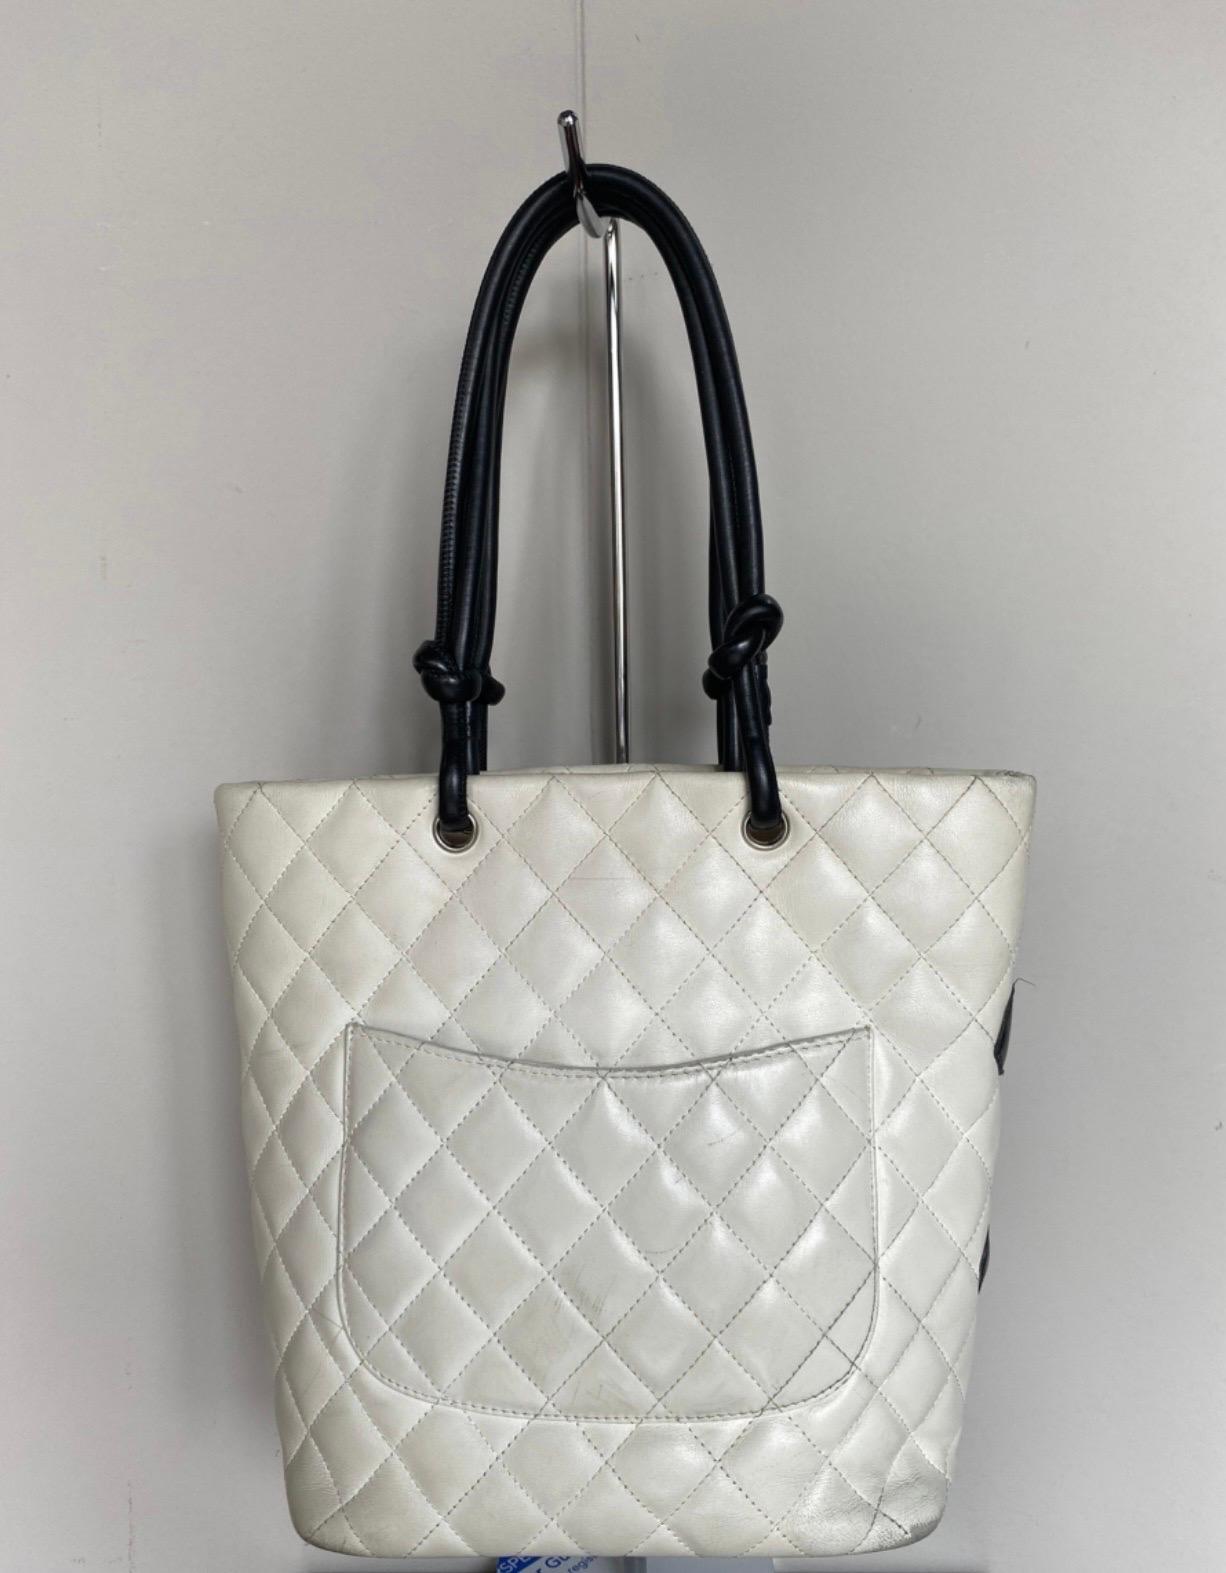 Chanel Cambon bag in white leather with black double C, with black leather handles.
inside in fuchsia-colored monogram nylon where there are a little bit of dirty spots, overall in good condition apart from the corner, as you can see in the photos.